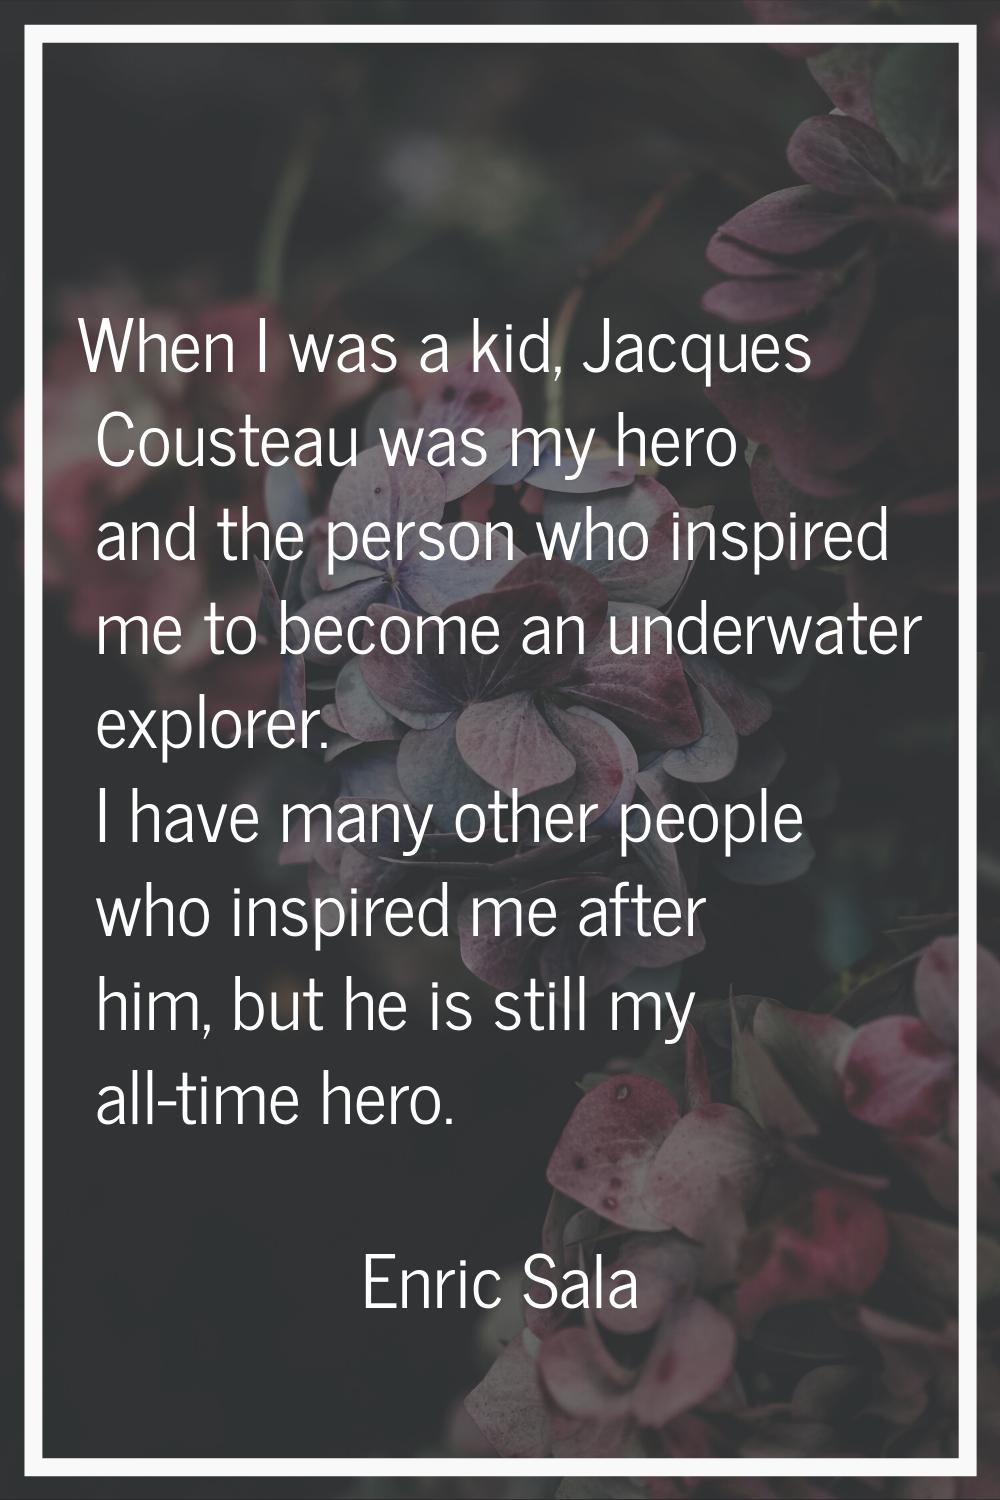 When I was a kid, Jacques Cousteau was my hero and the person who inspired me to become an underwat